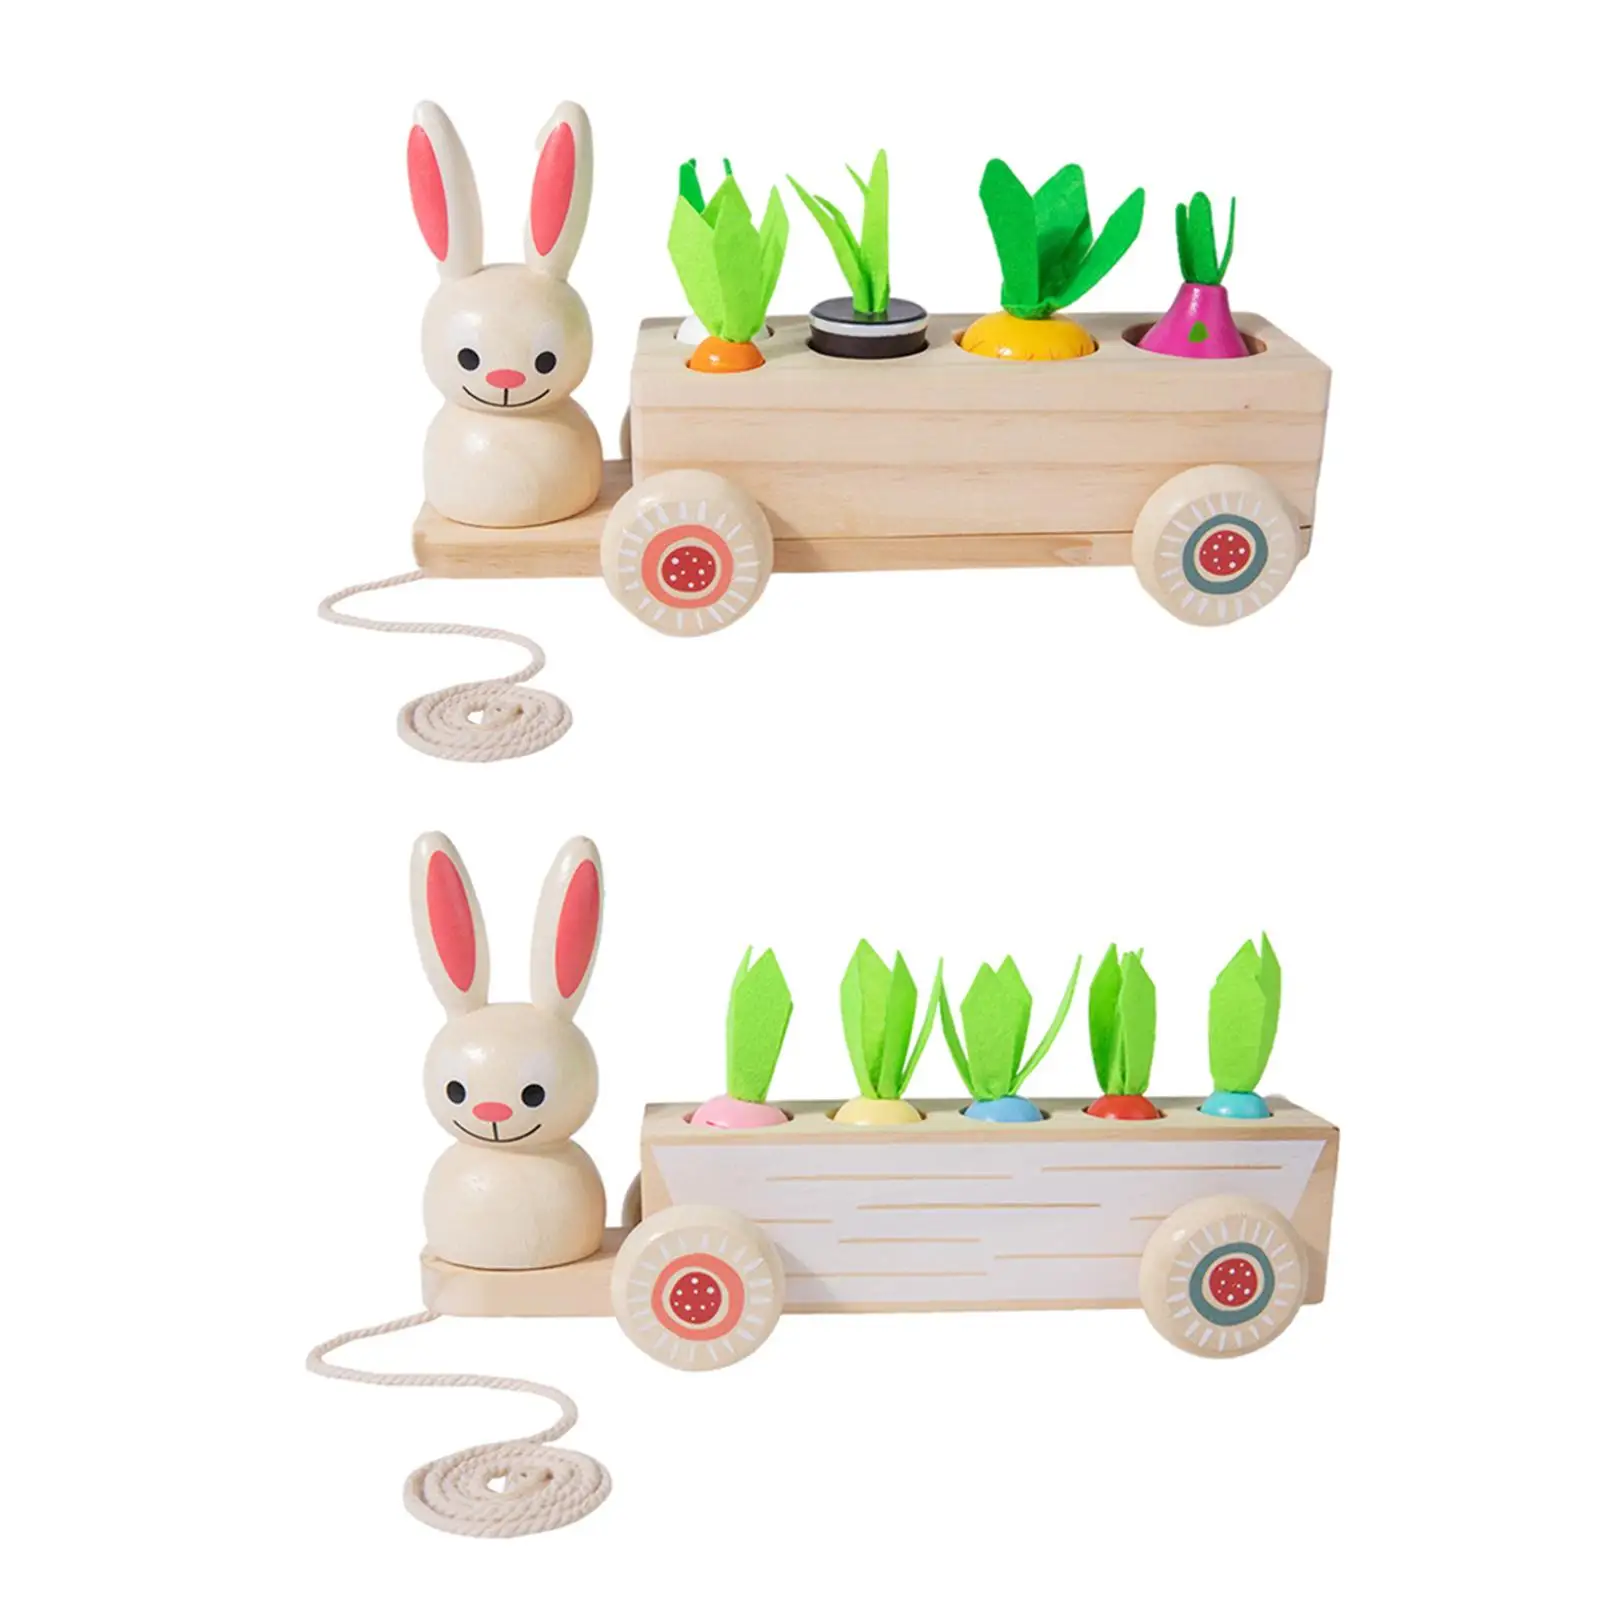 Baby Montessori Toys Wooden Block Happy Farm Pulling Carrot Shape Matching Size Cognition Montessori Educational Toy Gift Kids